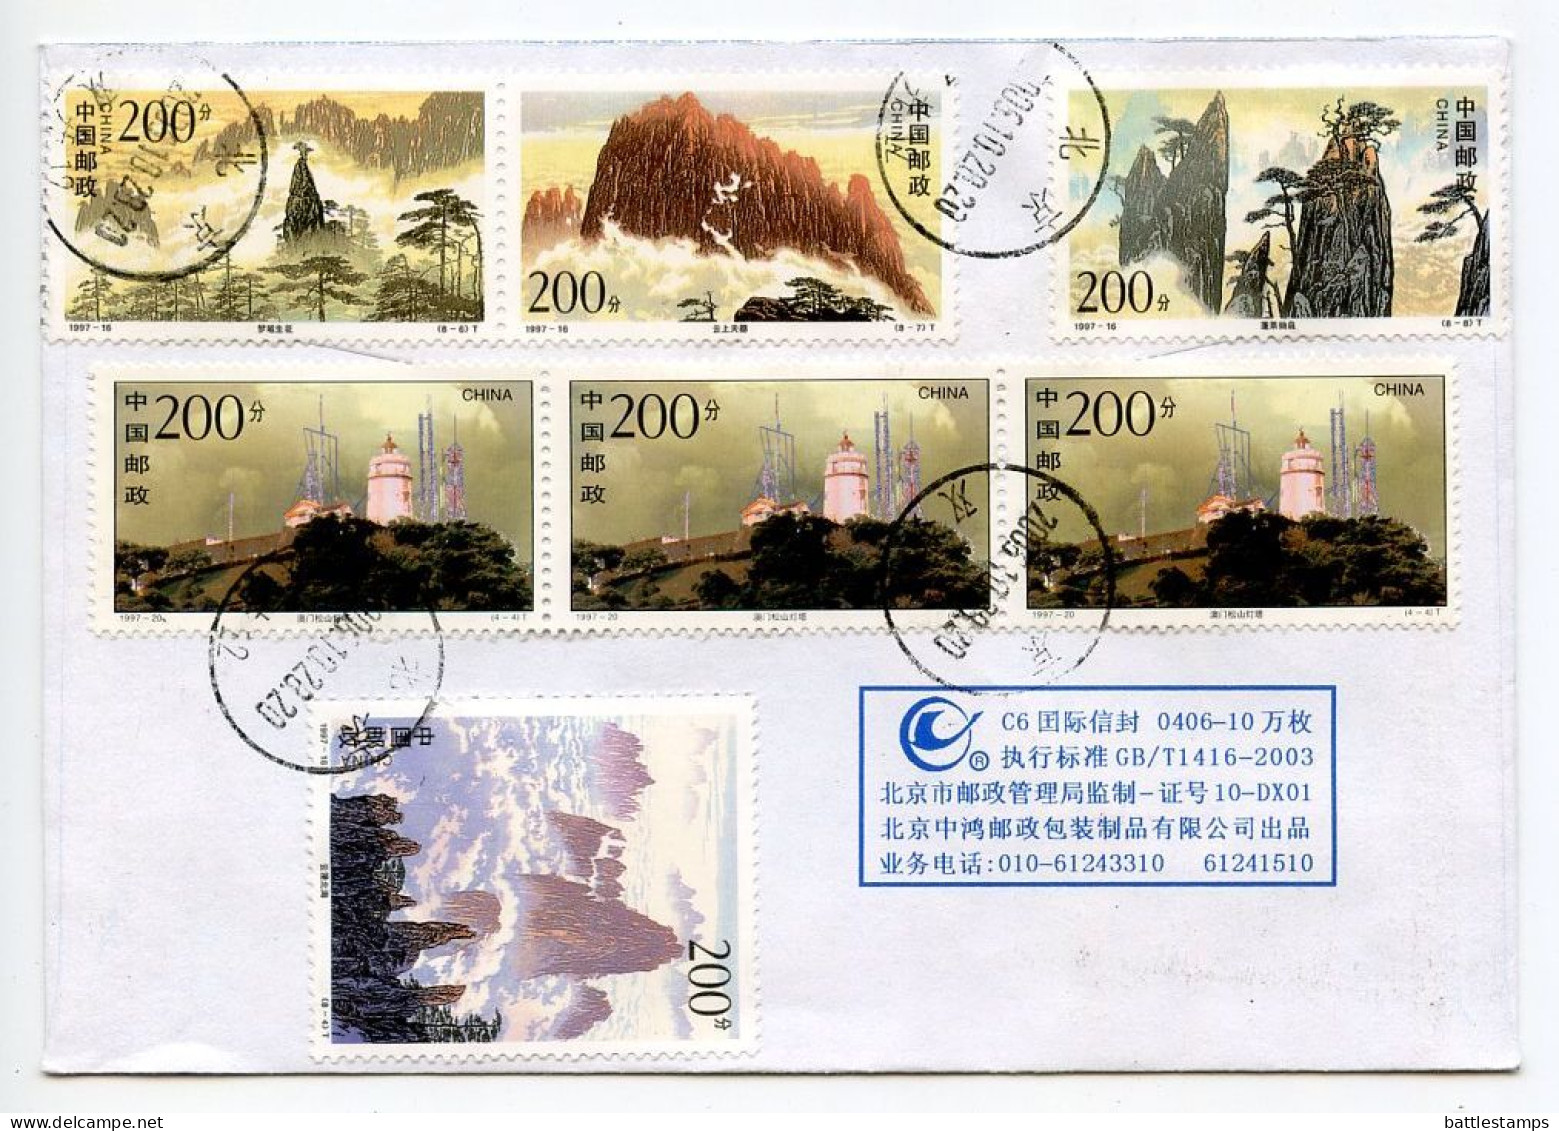 China, PRC 2006 Registered Airmail Cover - Bejing To Hartford, Vermont; Scott 2805d & F-h, And 2815 X 3 - Briefe U. Dokumente